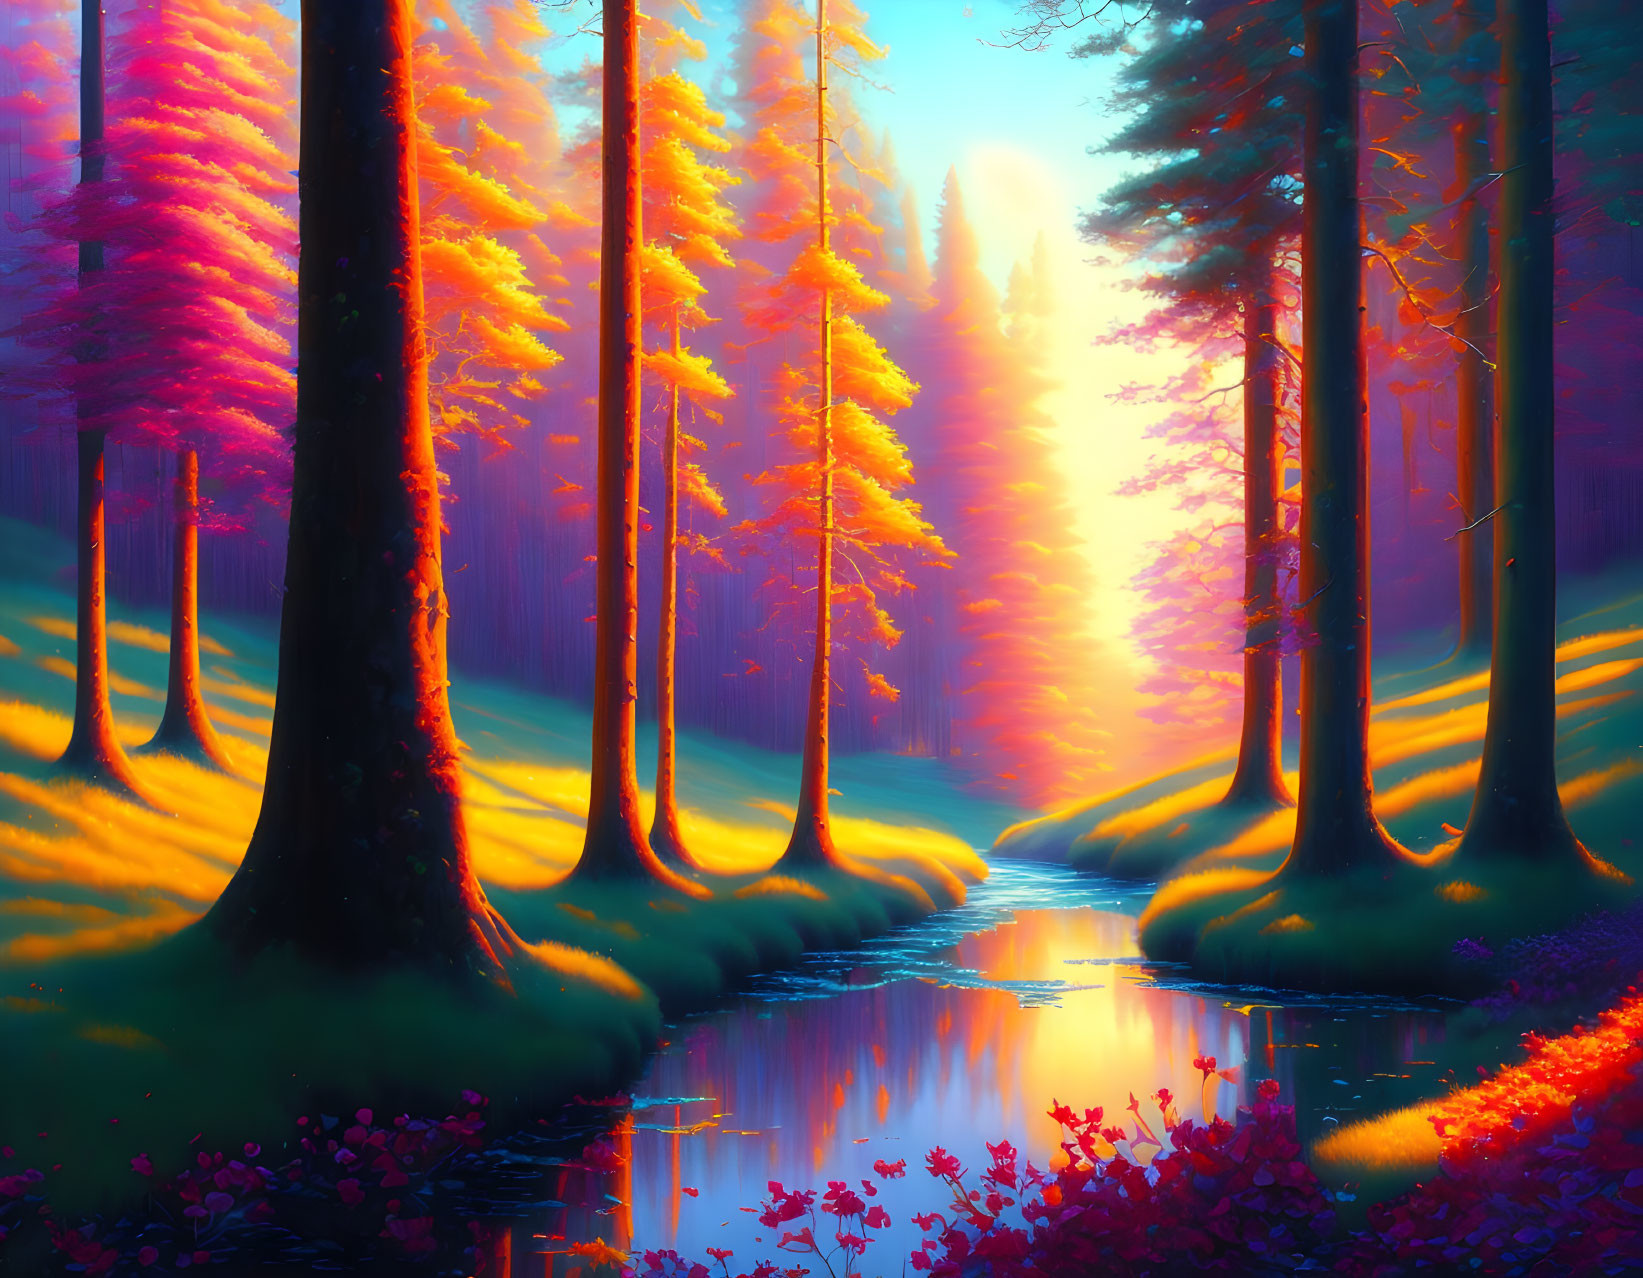 Colorful Forest Scene: Pink and Orange Foliage, Sunset Glow, Tranquil Stream